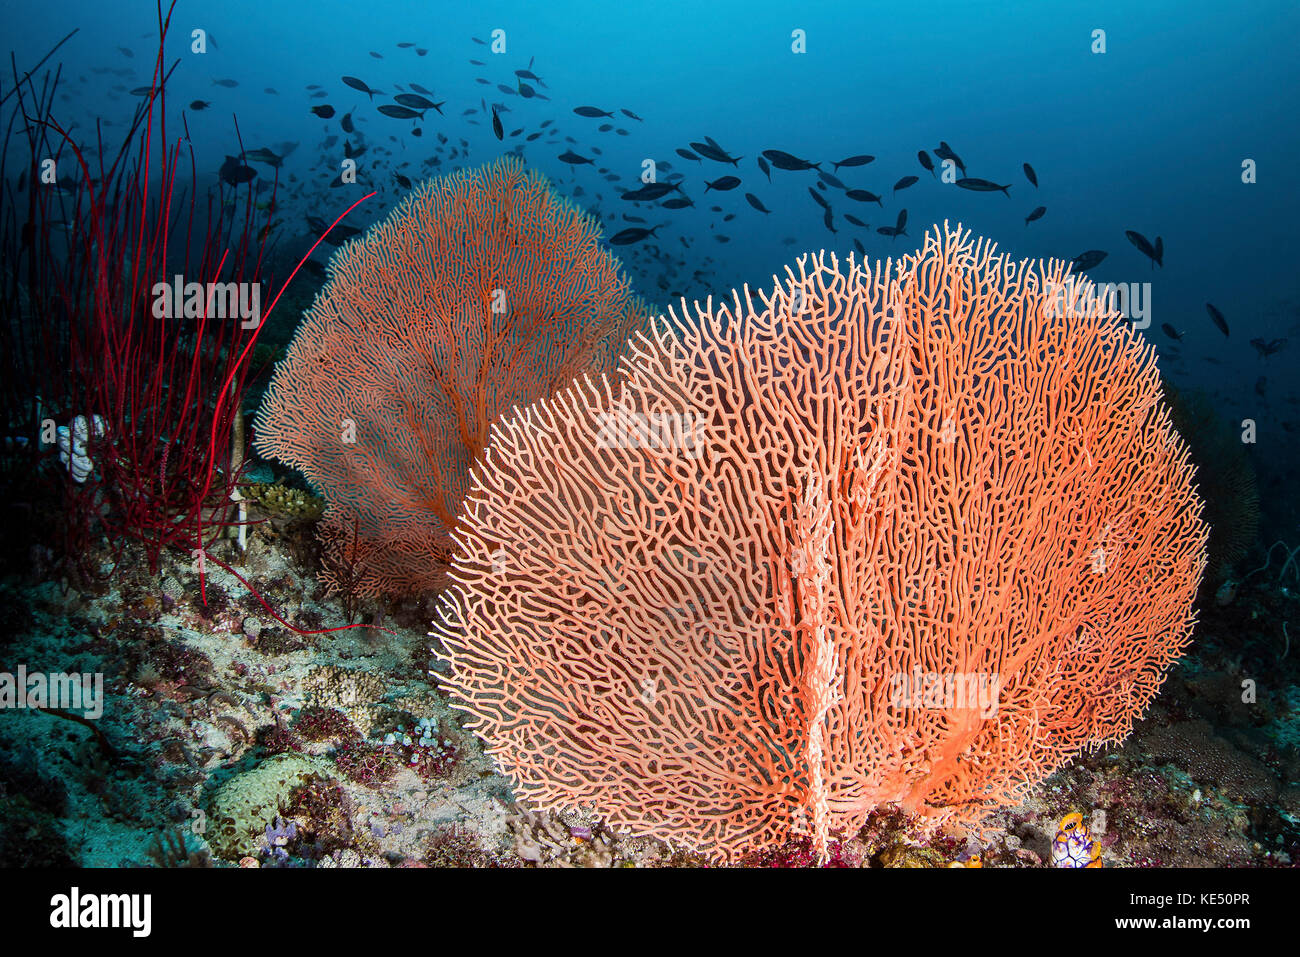 Sea fans and fish on a coral reef, Raja Ampat, Indonesia. Stock Photo